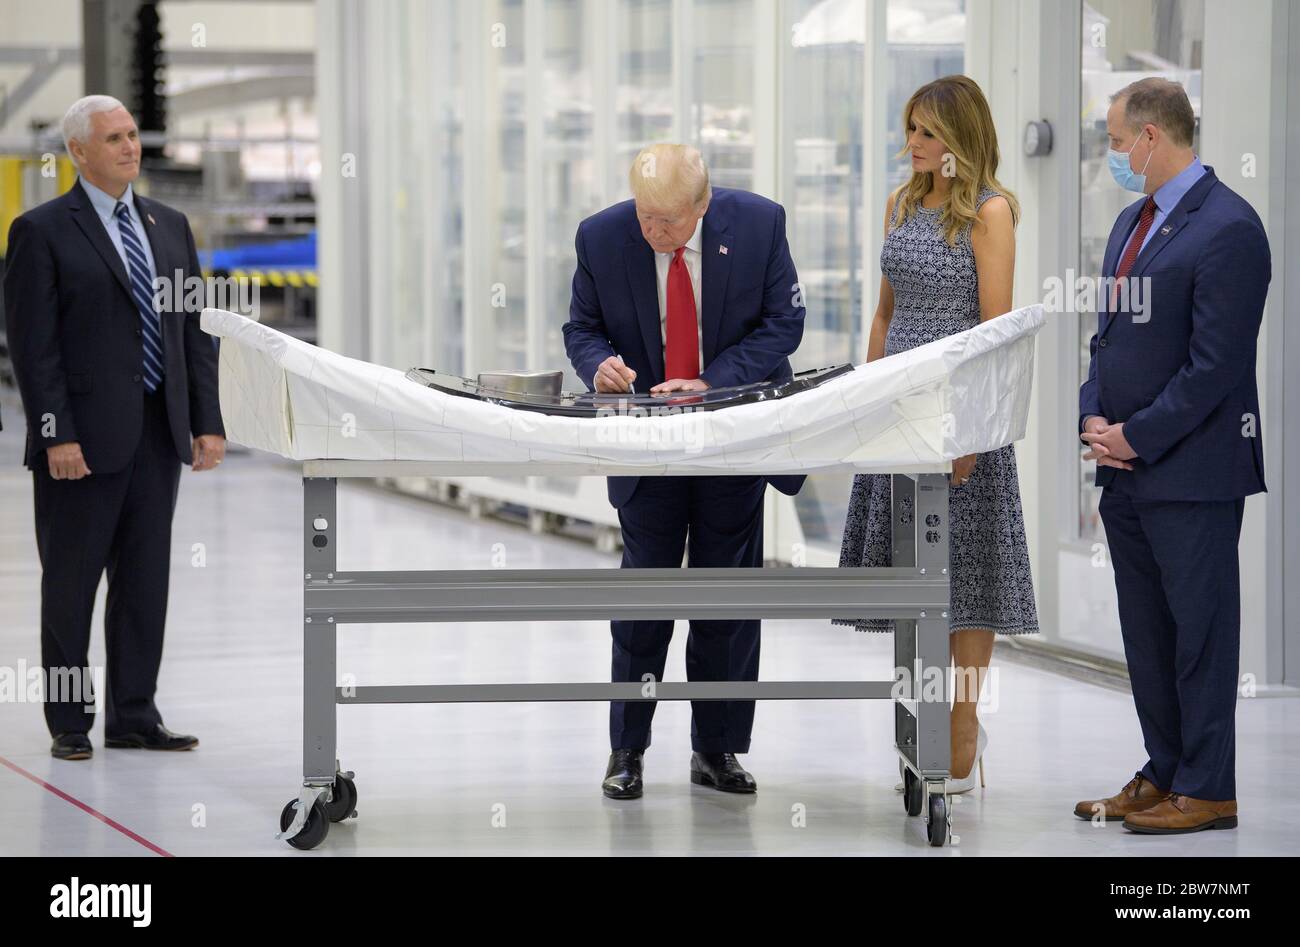 U.S. President Donald Trump signs an Orion capsule hatch that will be used for the Artemis II mission as Vice President Mike Pence, First Lady Melania Trump, and NASA Administrator Jim Bridenstine look on during a tour of the Neil Armstrong Operations and Checkout Building May 27, 2020 in Cape Canaveral, Florida. Stock Photo